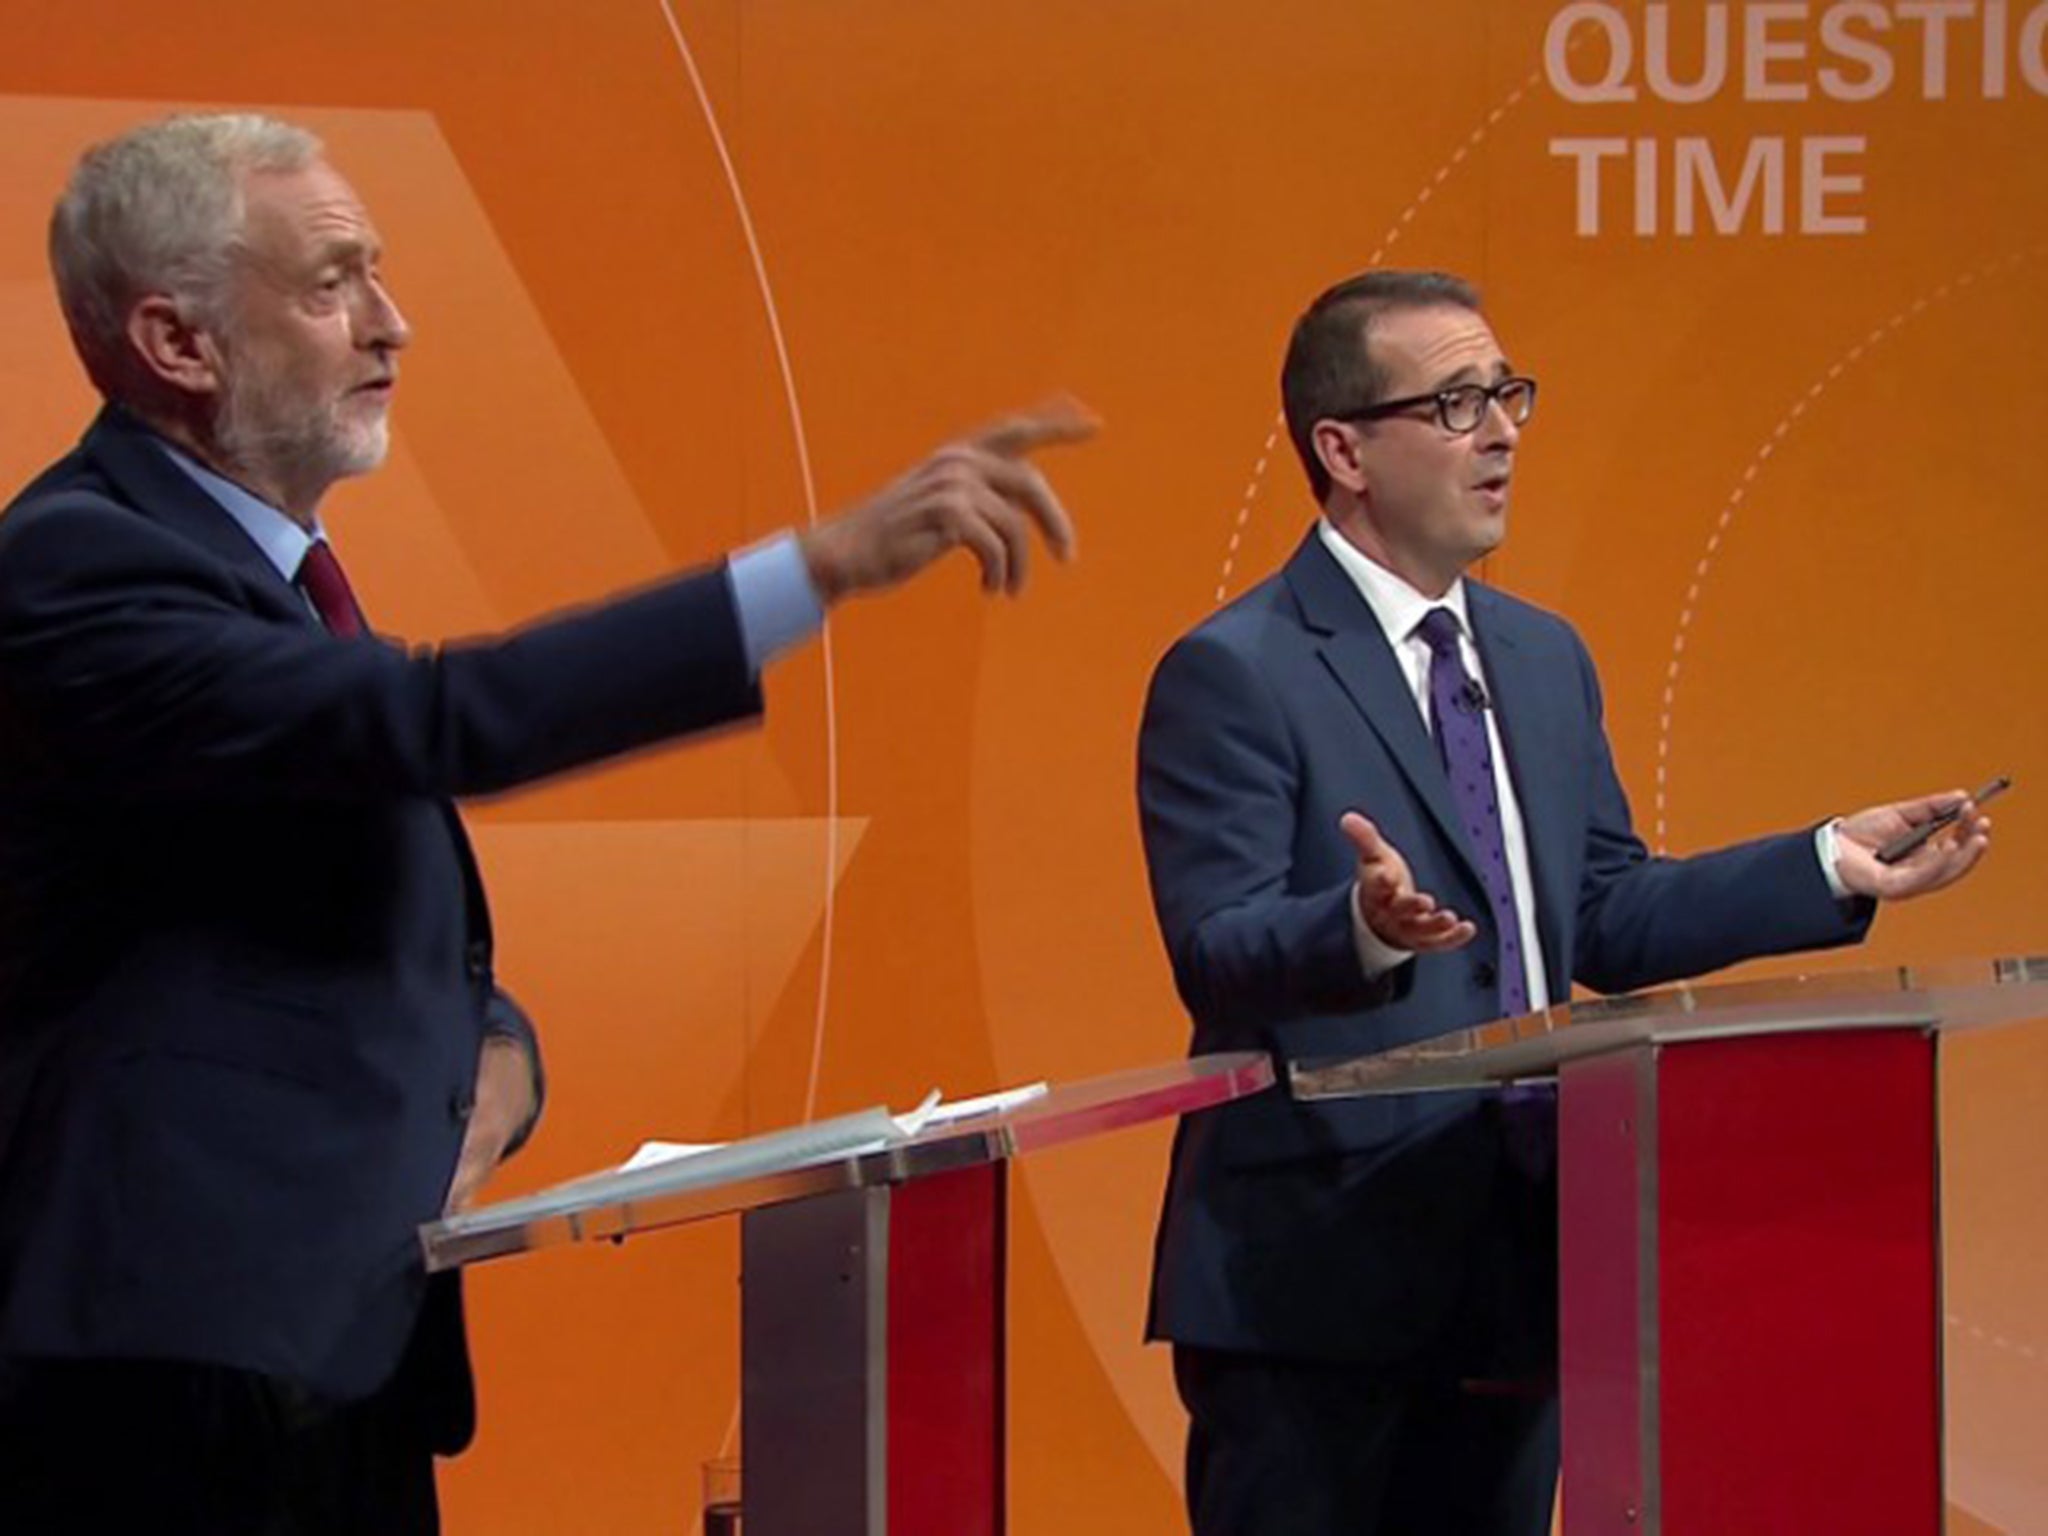 Corbyn (left) and Smith debating in Oldham last night